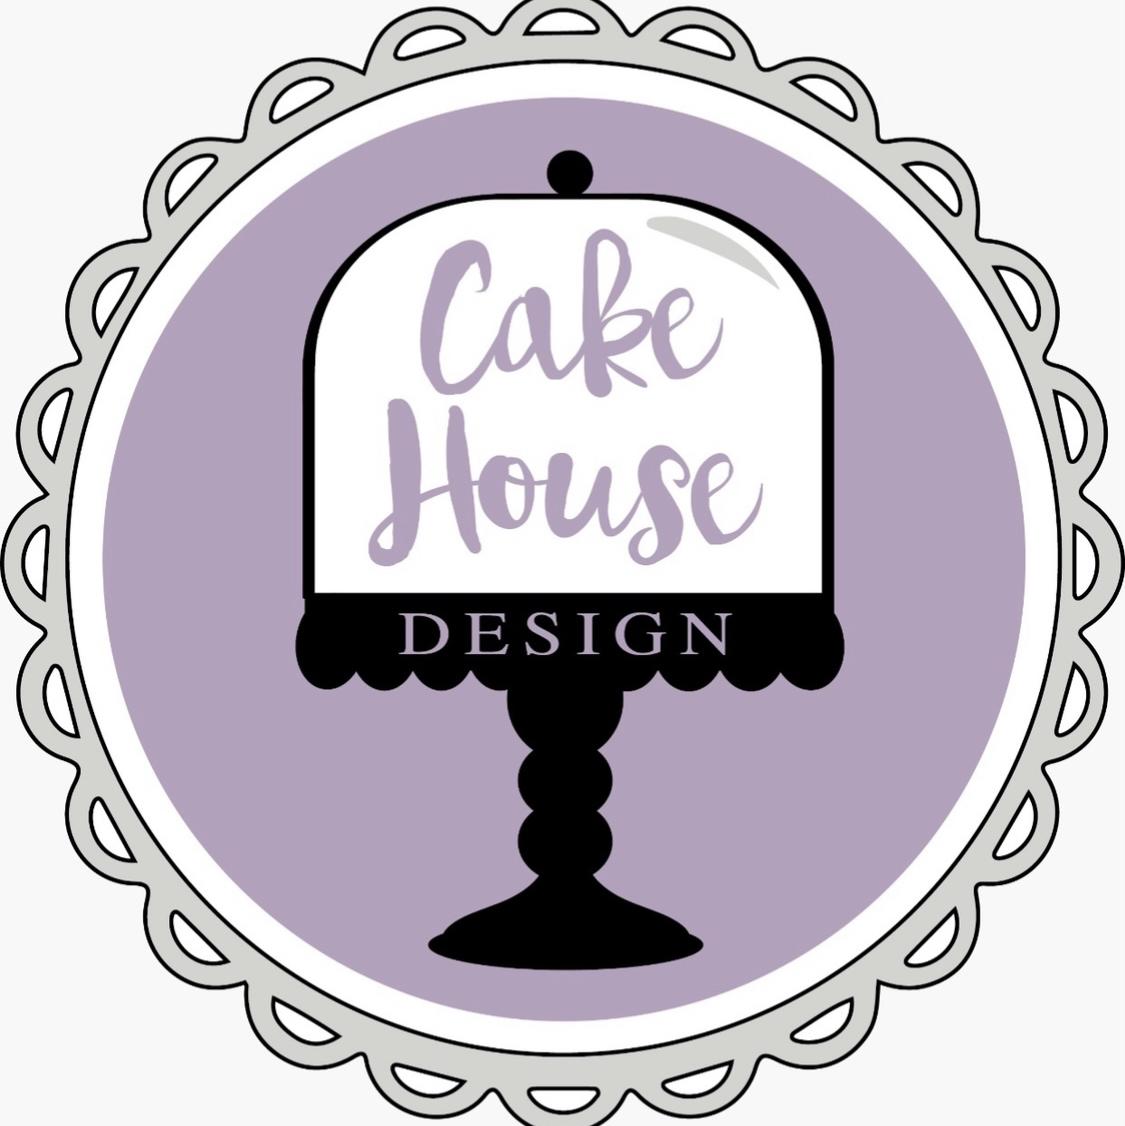 CakeHouseDesign's images